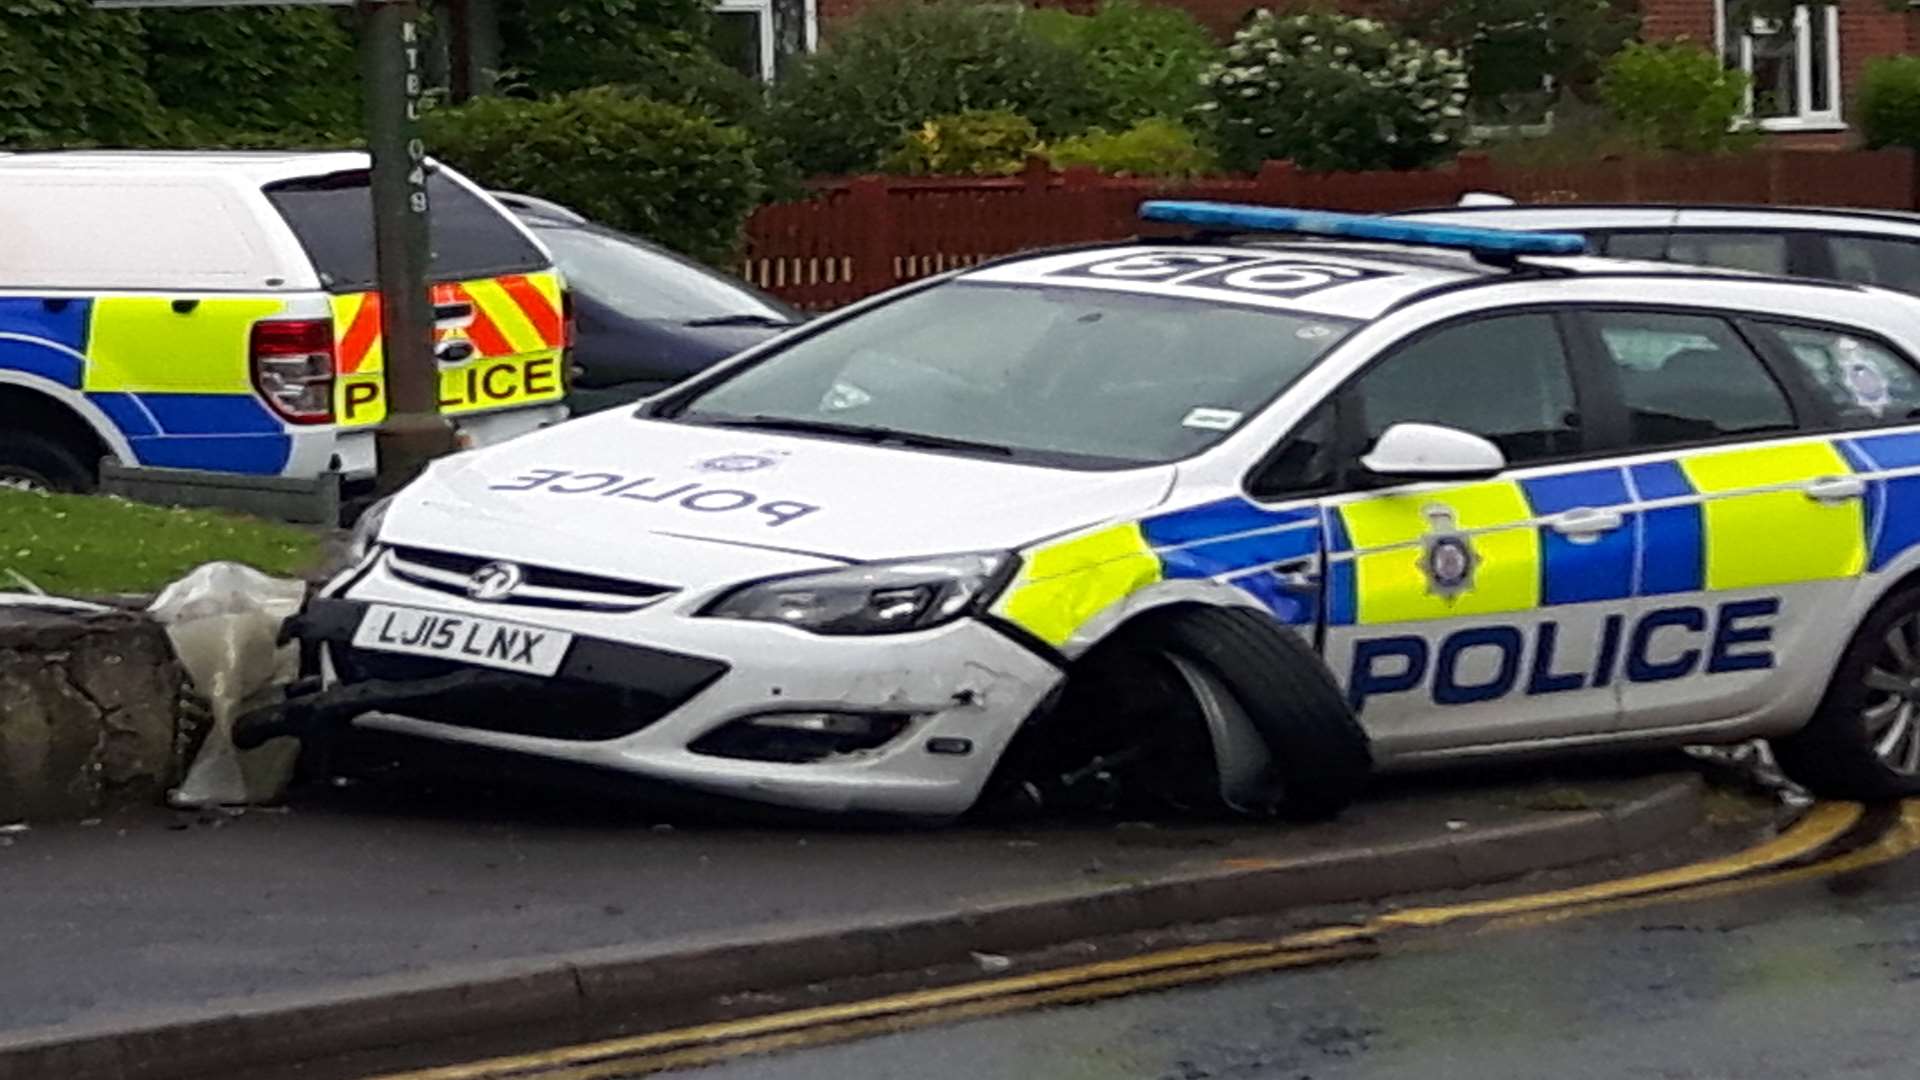 The BTP vehicle and a Ford Focus collided